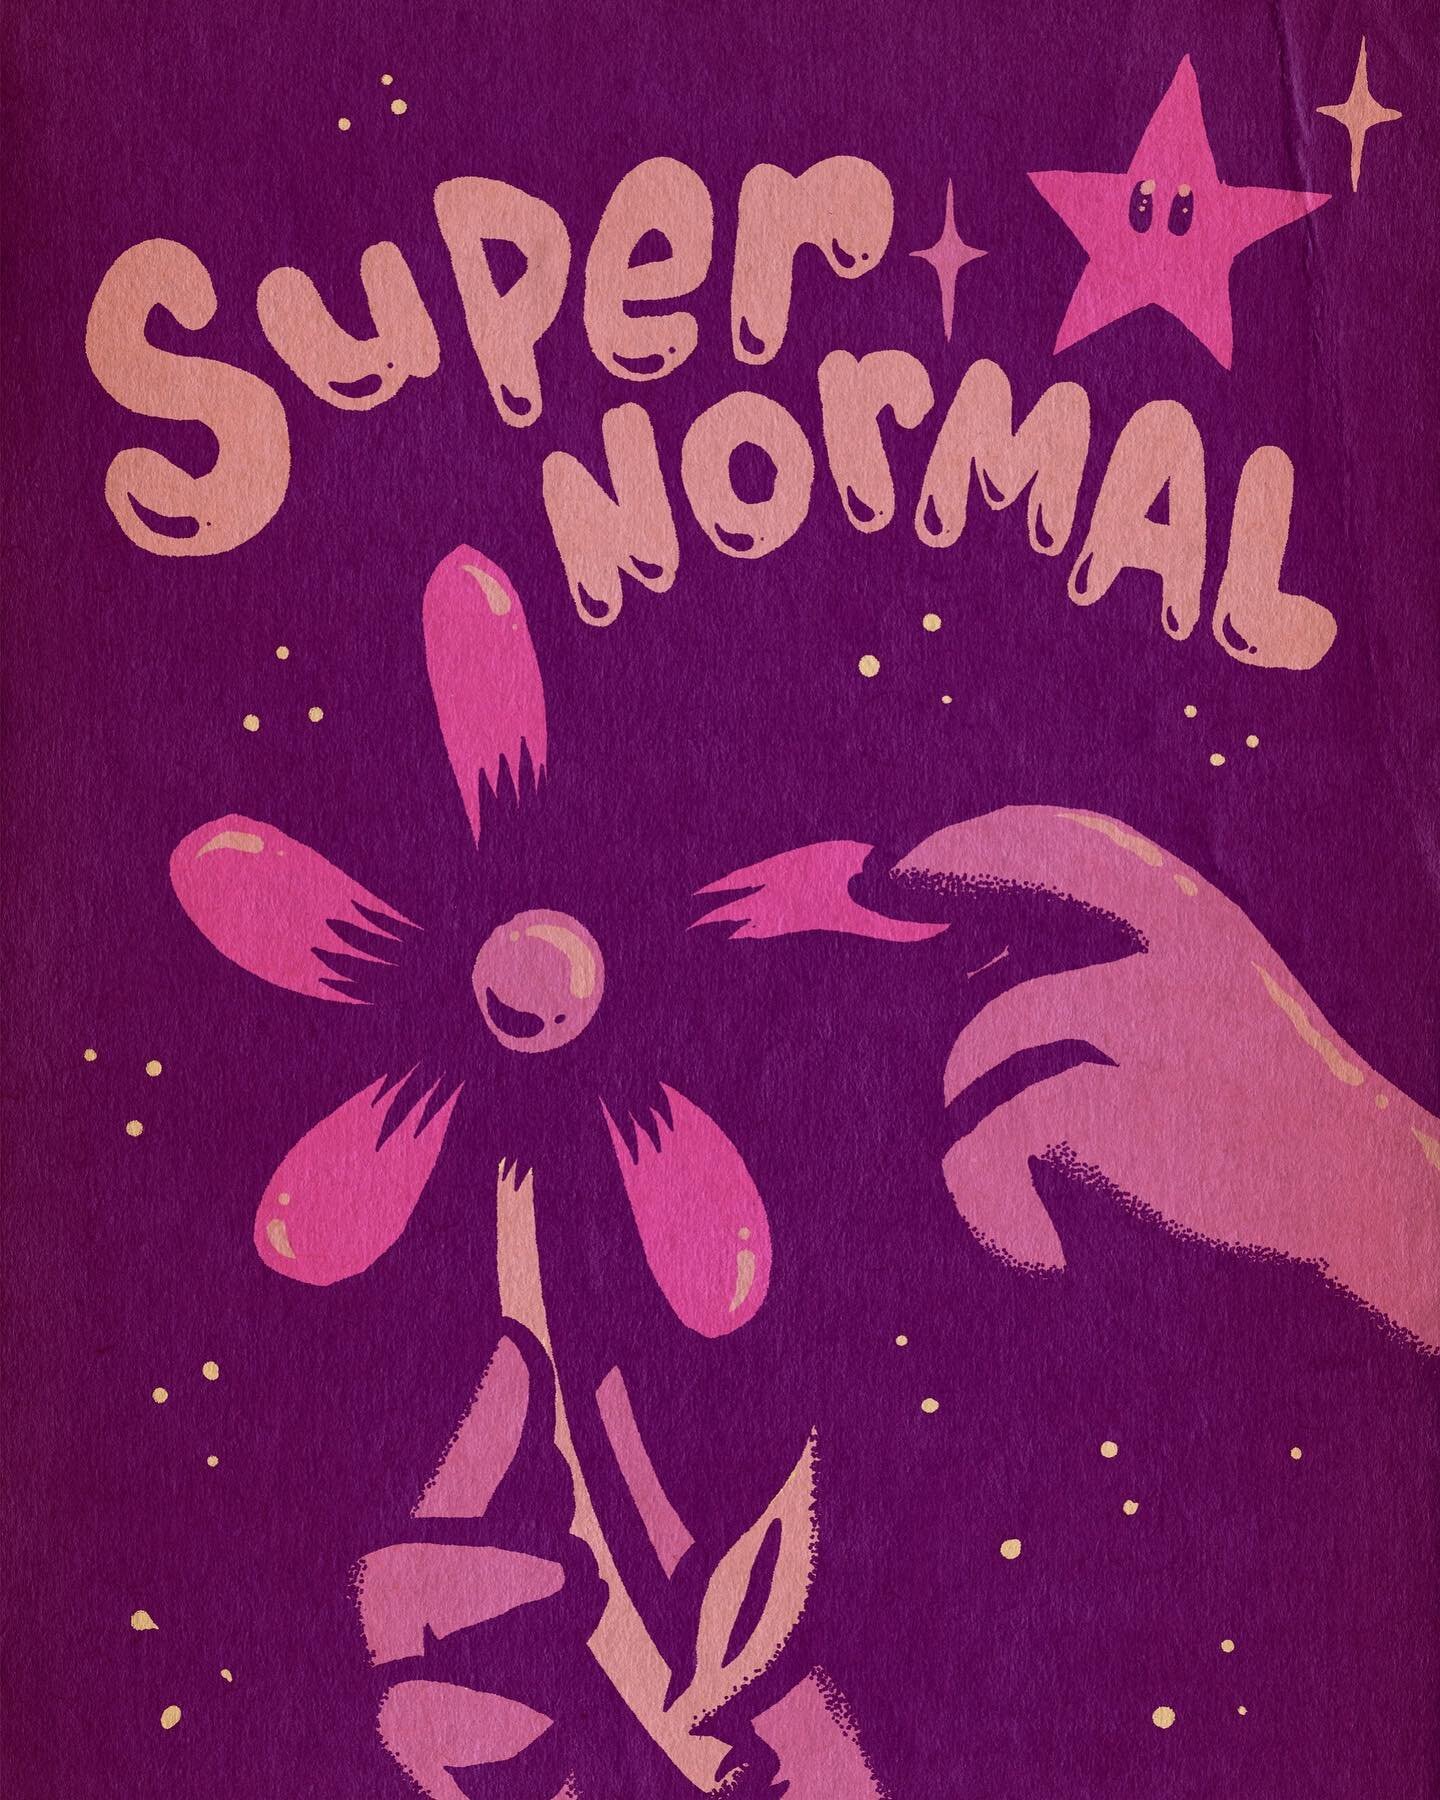 We&rsquo;re all a little super normal. 💜

Some Sunday cosmic petal plucking. Hope the day finds y&rsquo;all well! 🌼

#supernormal #sunday #cosmic #flowers #drawingoftheday #illustration #paranormal #cartoon #weirdoart